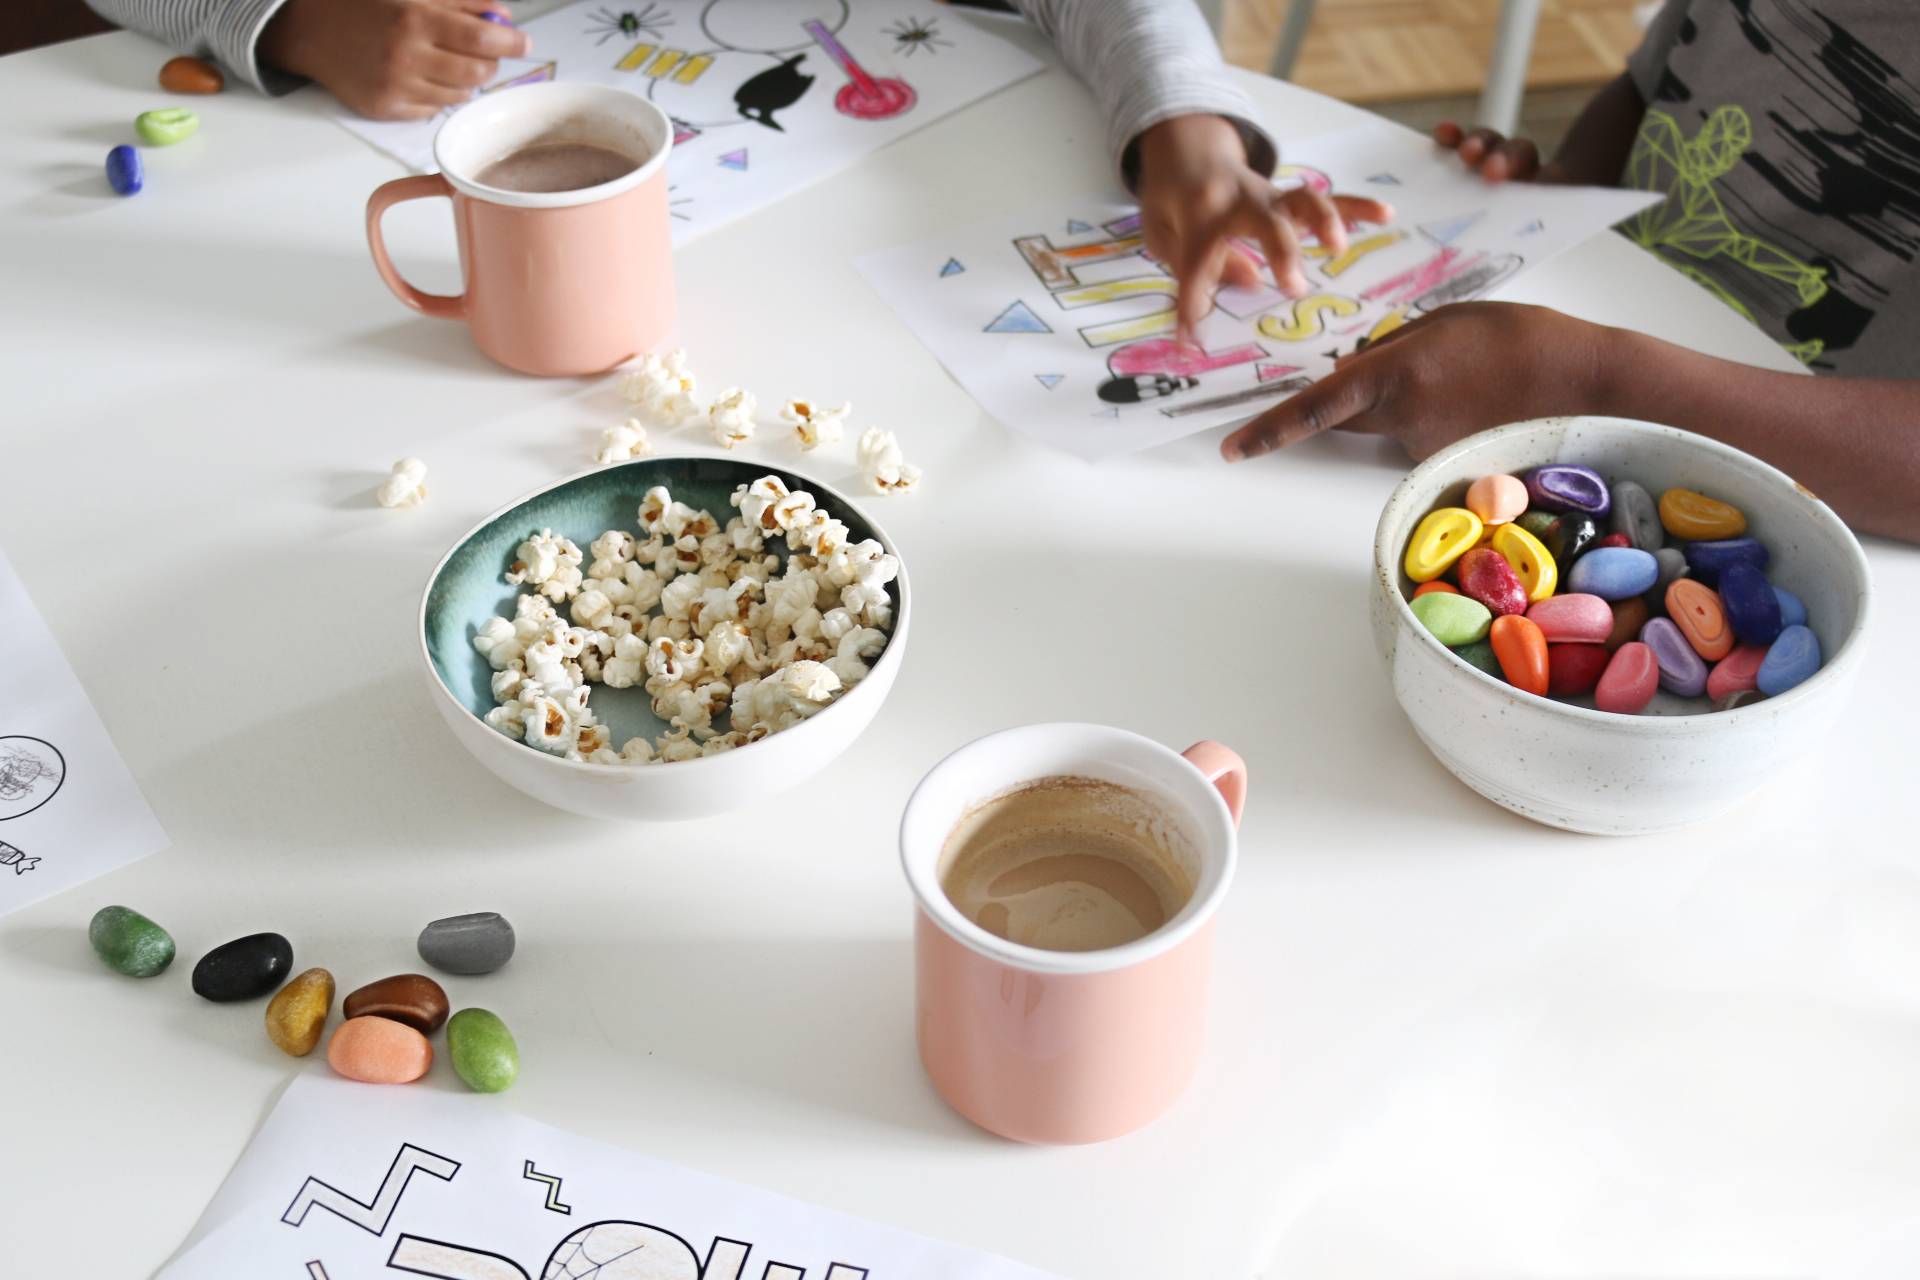 Peoplecare next to a bowl of popcorn, candy and hot cocoa mugs are on a table.